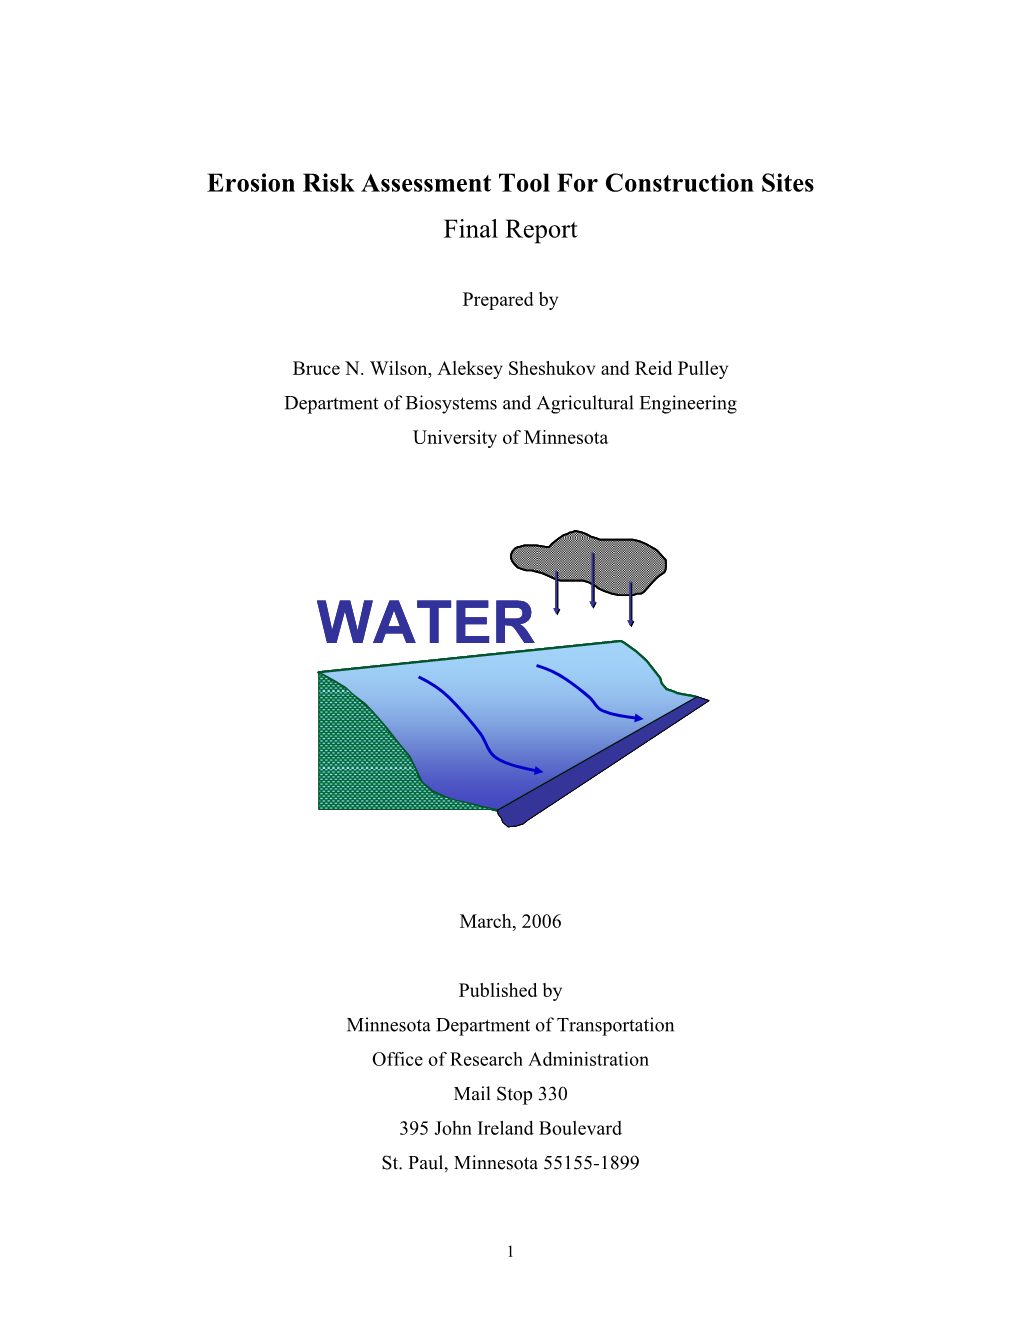 Erosion Risk Assessment Tool for Construction Sites Final Report